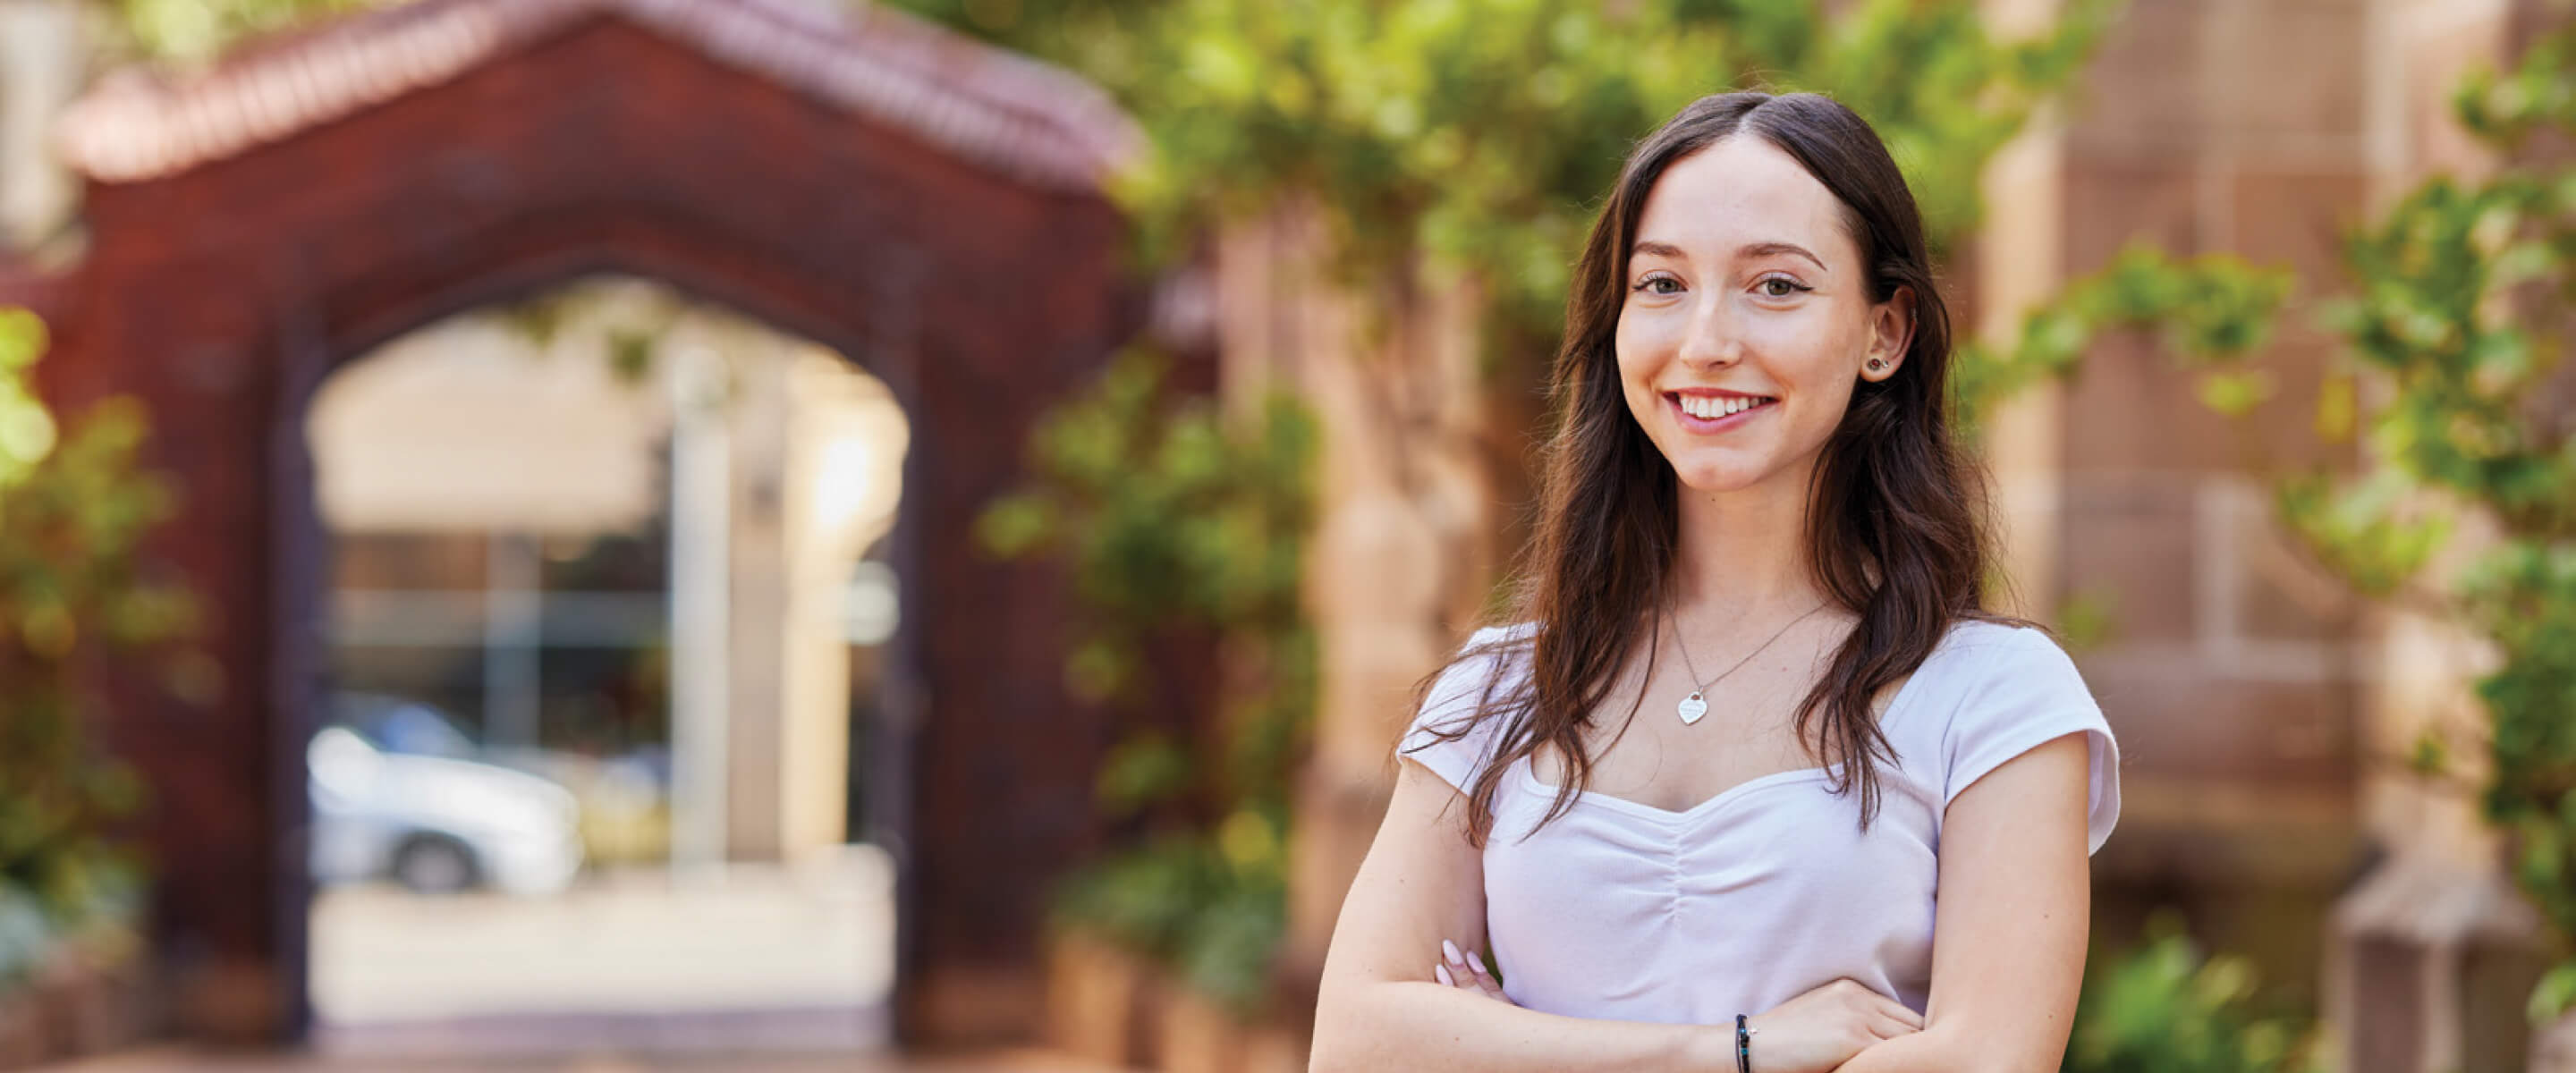 Notre Dame female undergraduate Education student Sophie wearing a white top standing inside the Sydney campus 